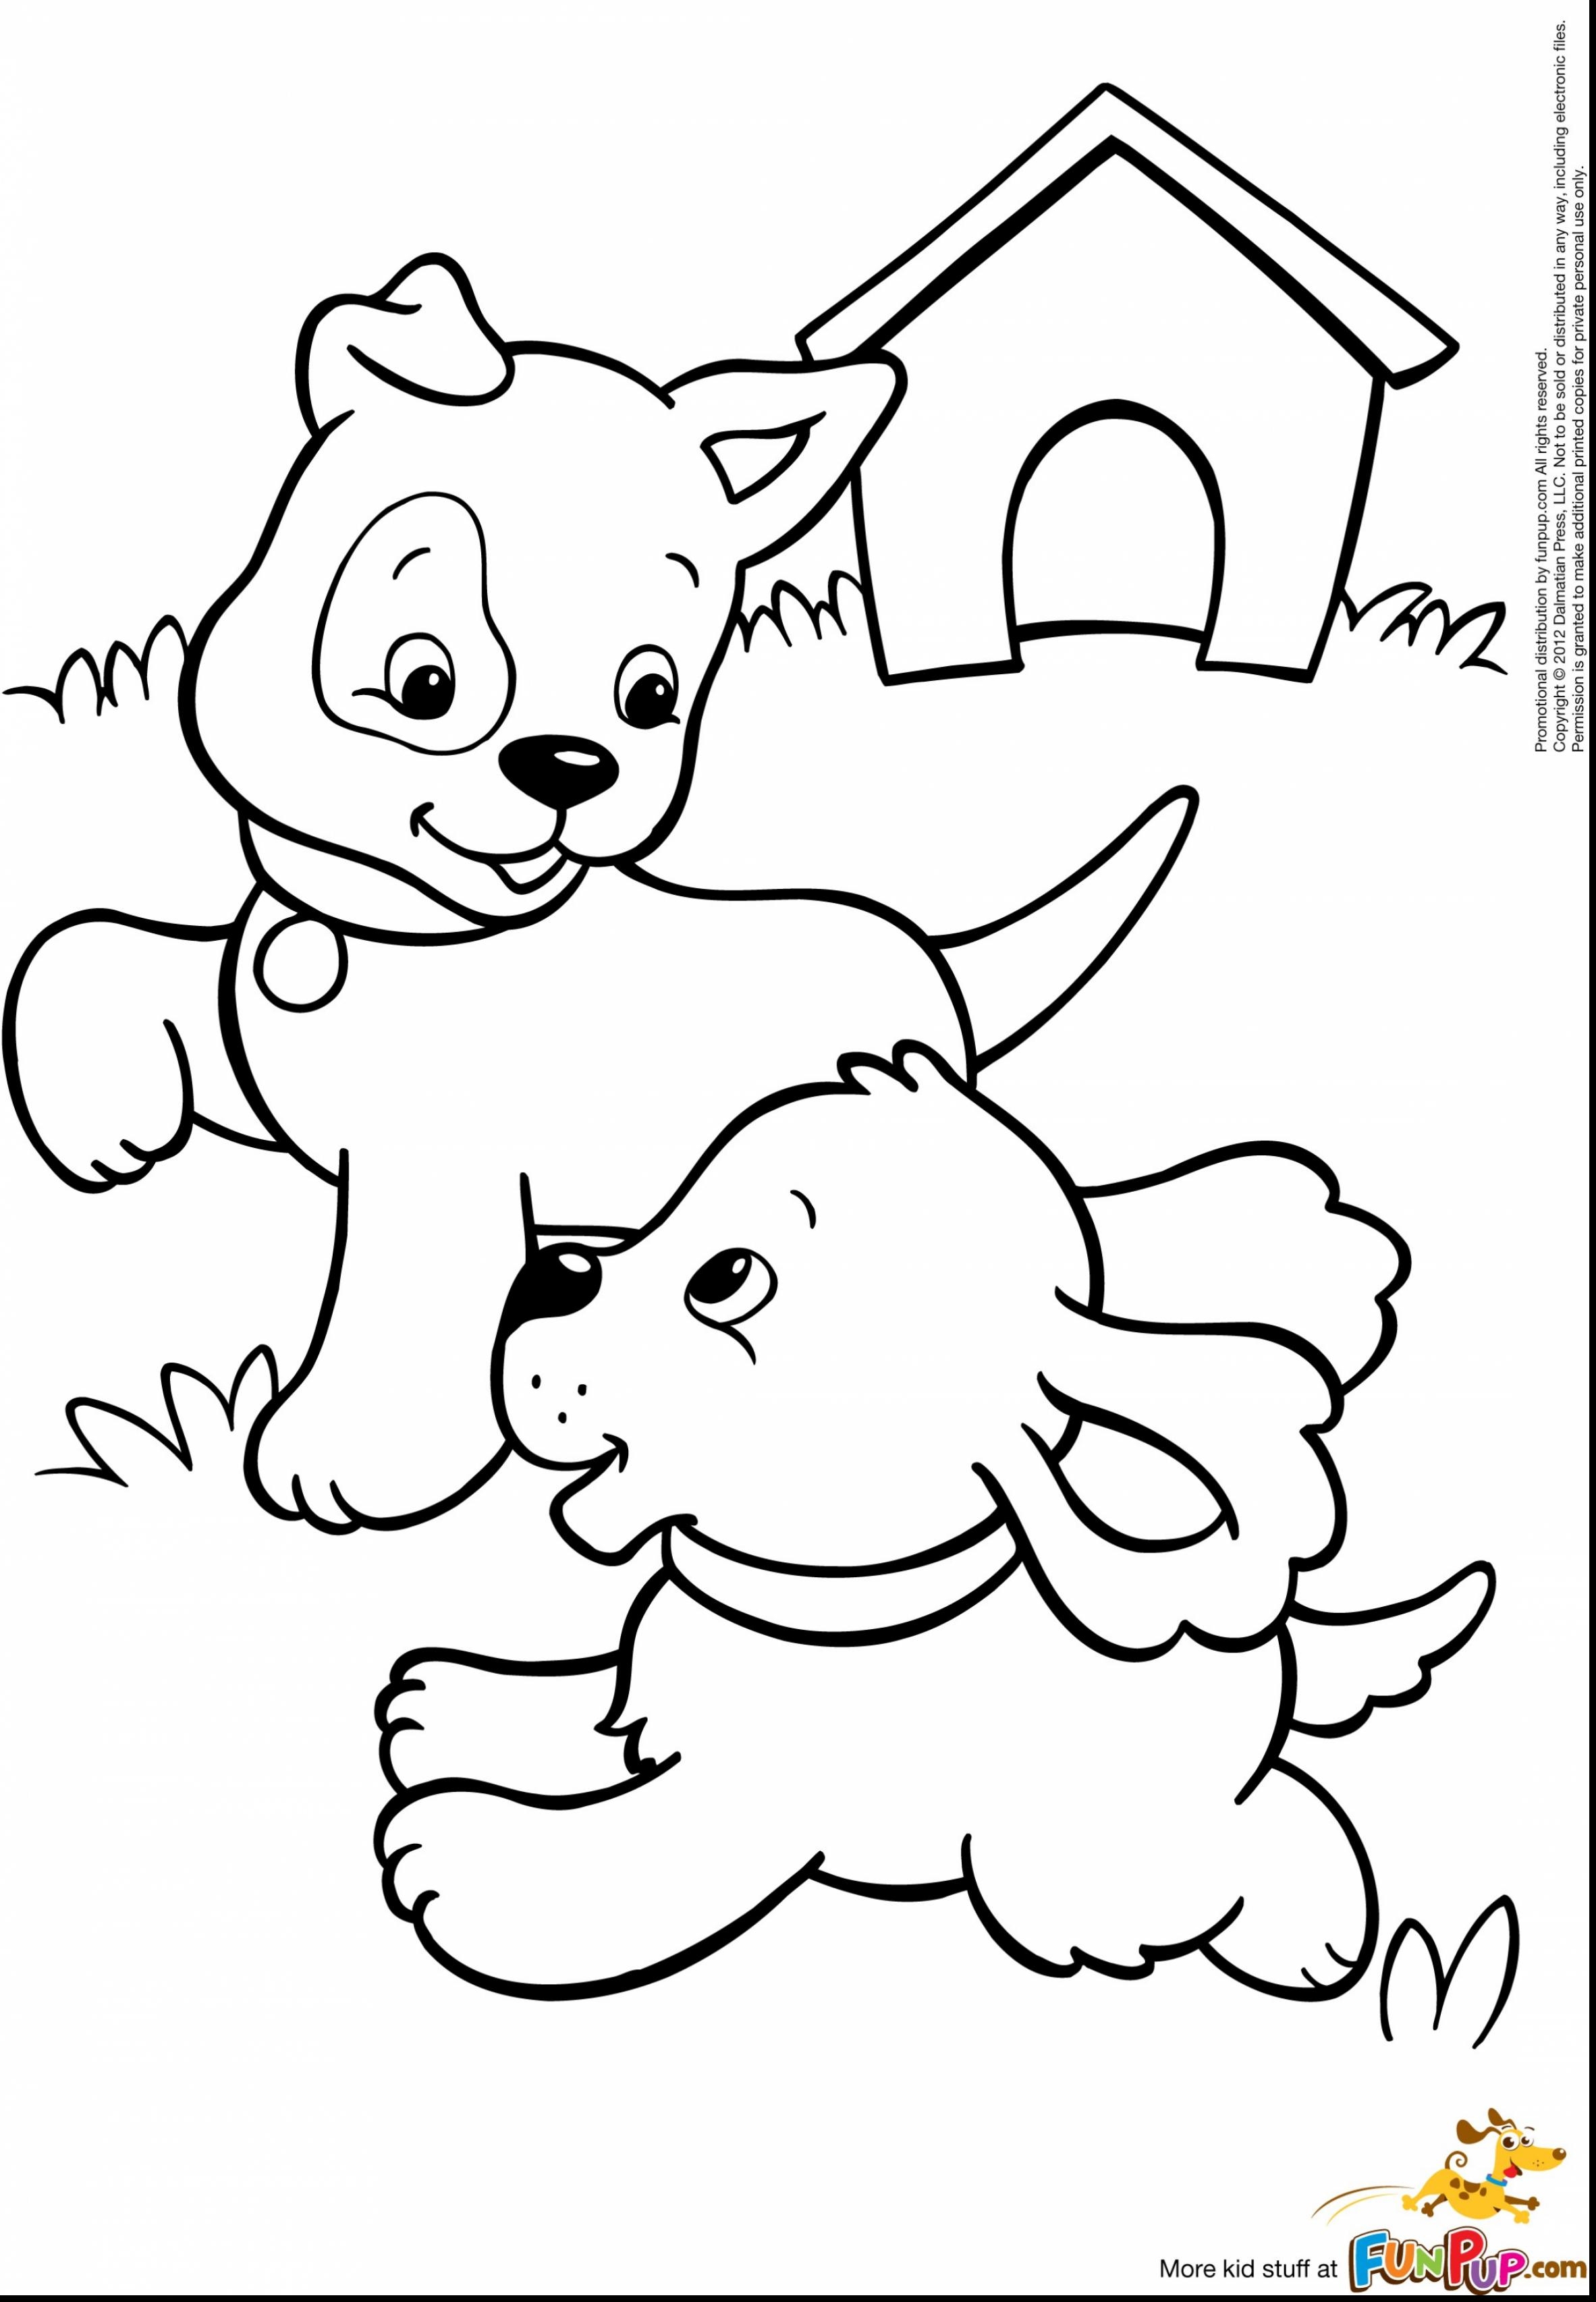 boxer-dog-coloring-pages-at-getcolorings-free-printable-colorings